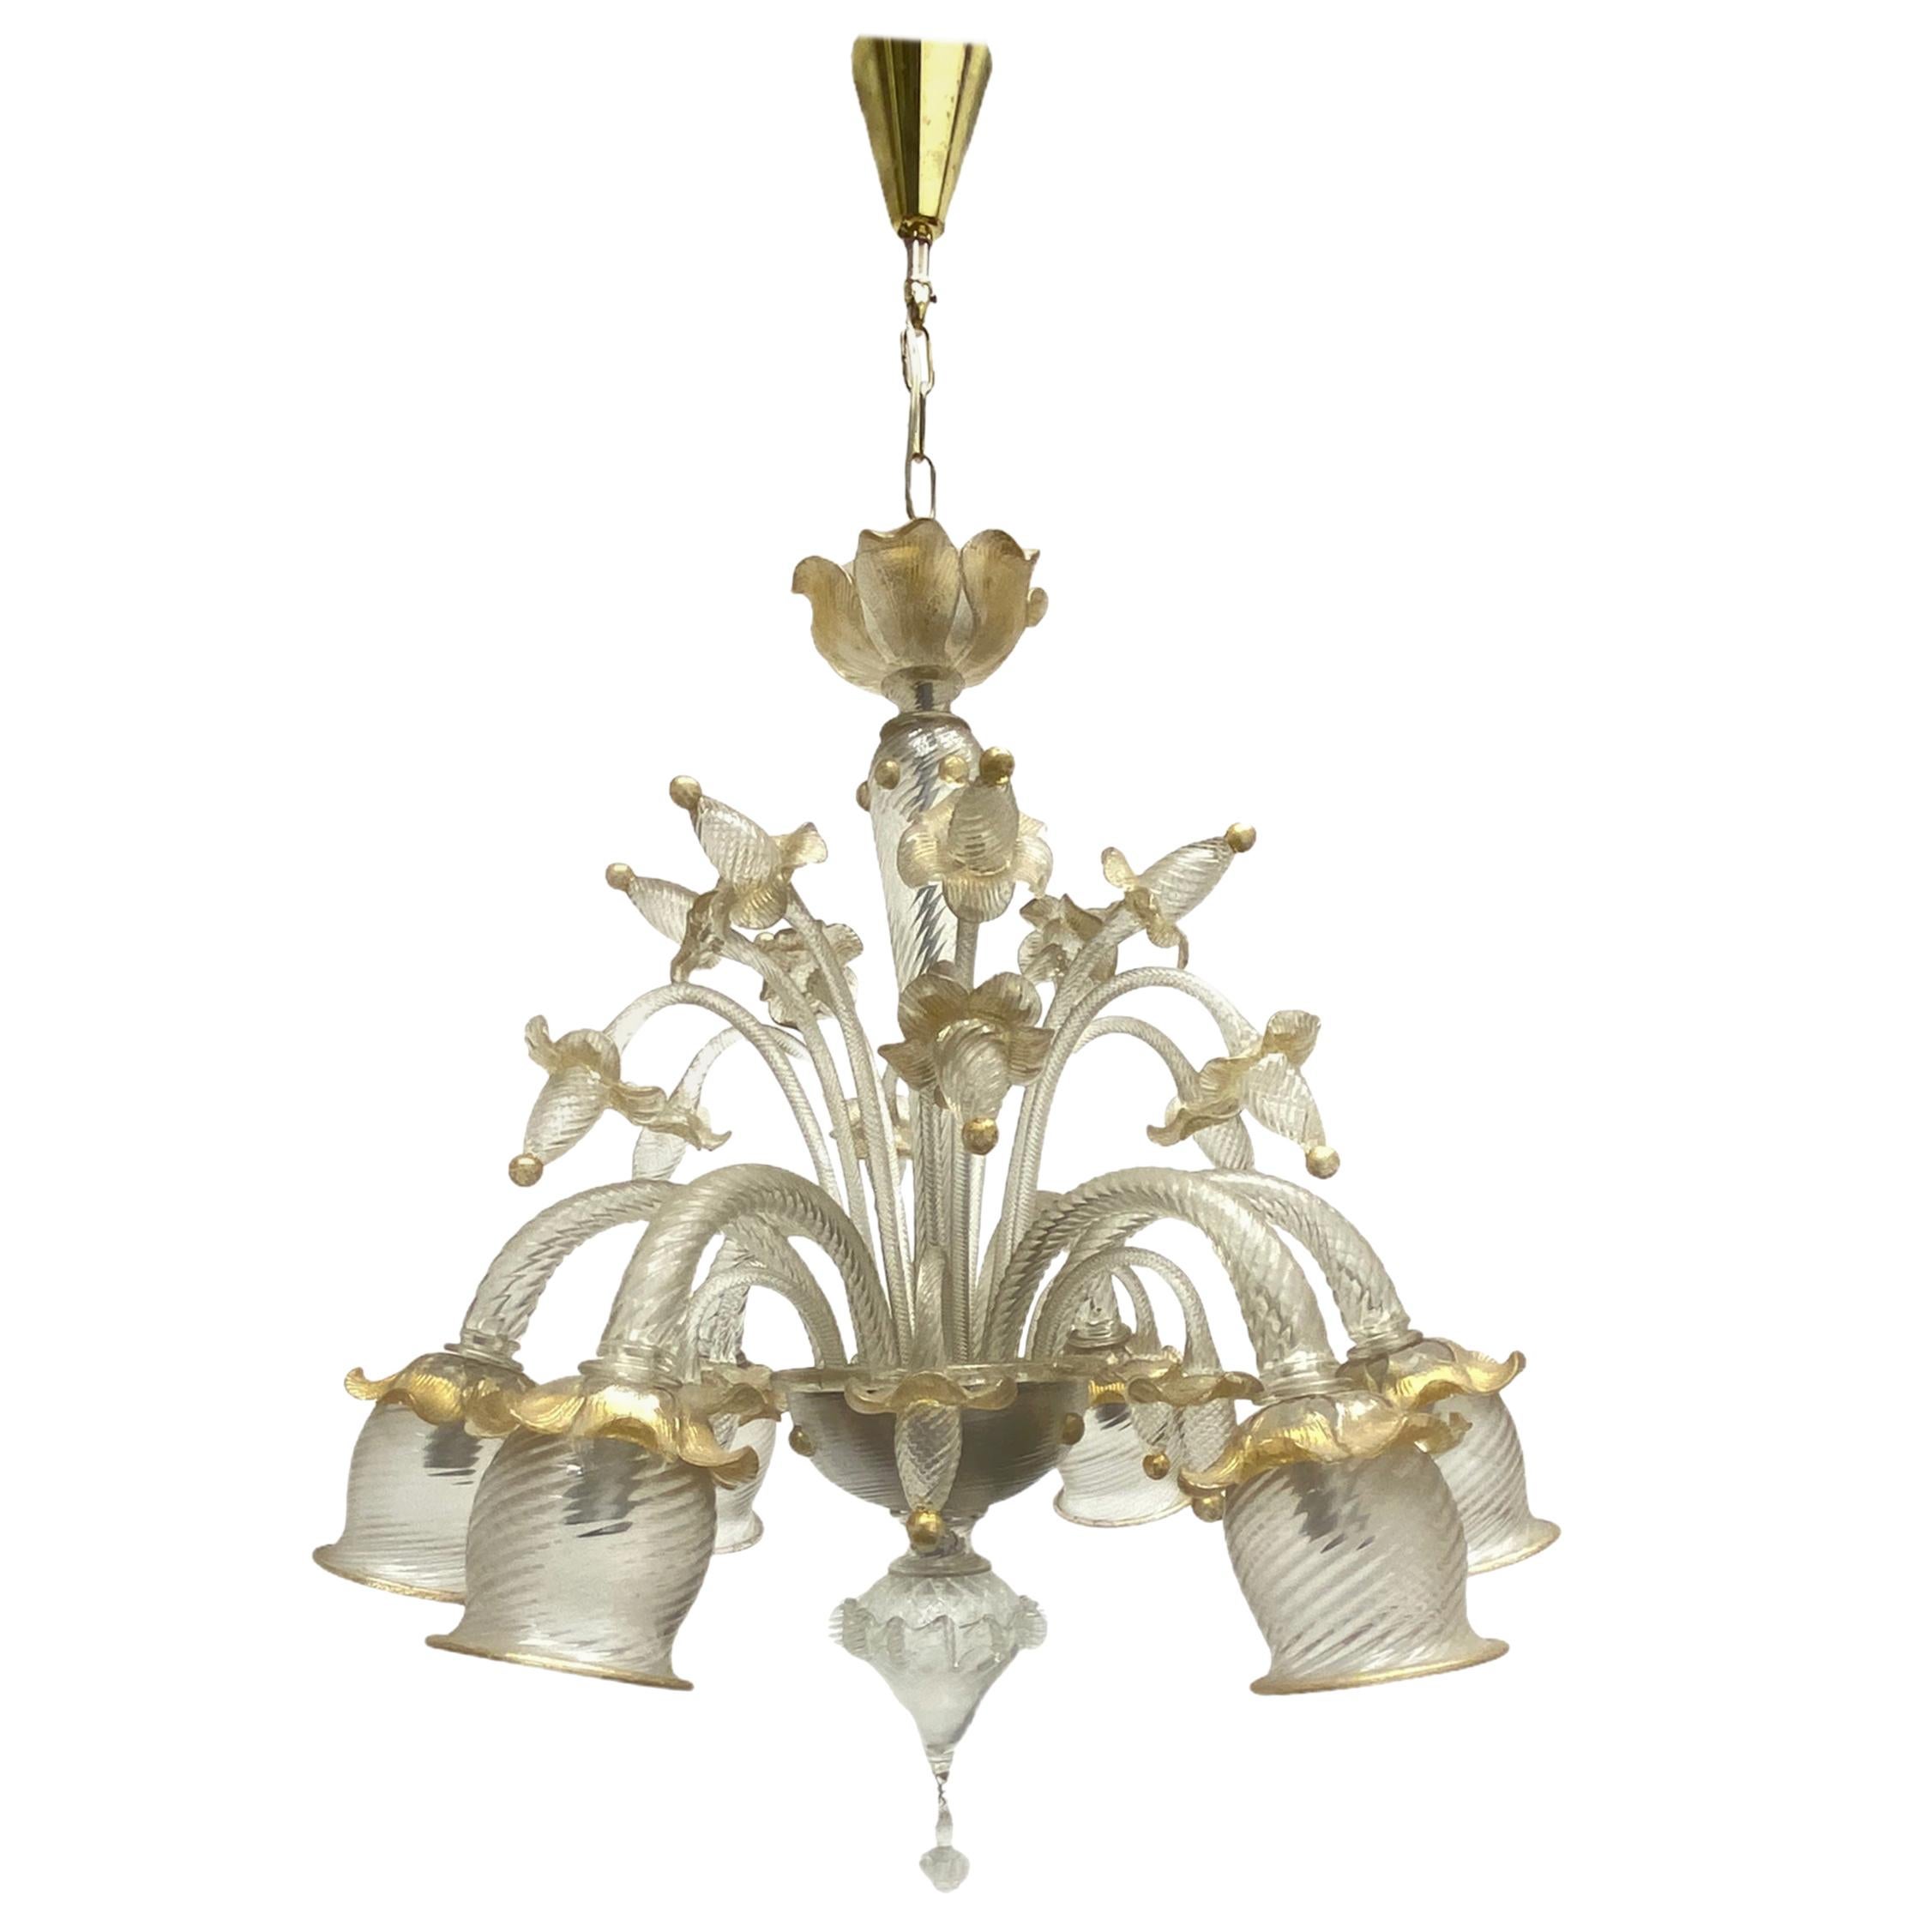 Stunning Gold Dusted Murano Chandelier, by Barovier Toso Murano, Italy, 1960s